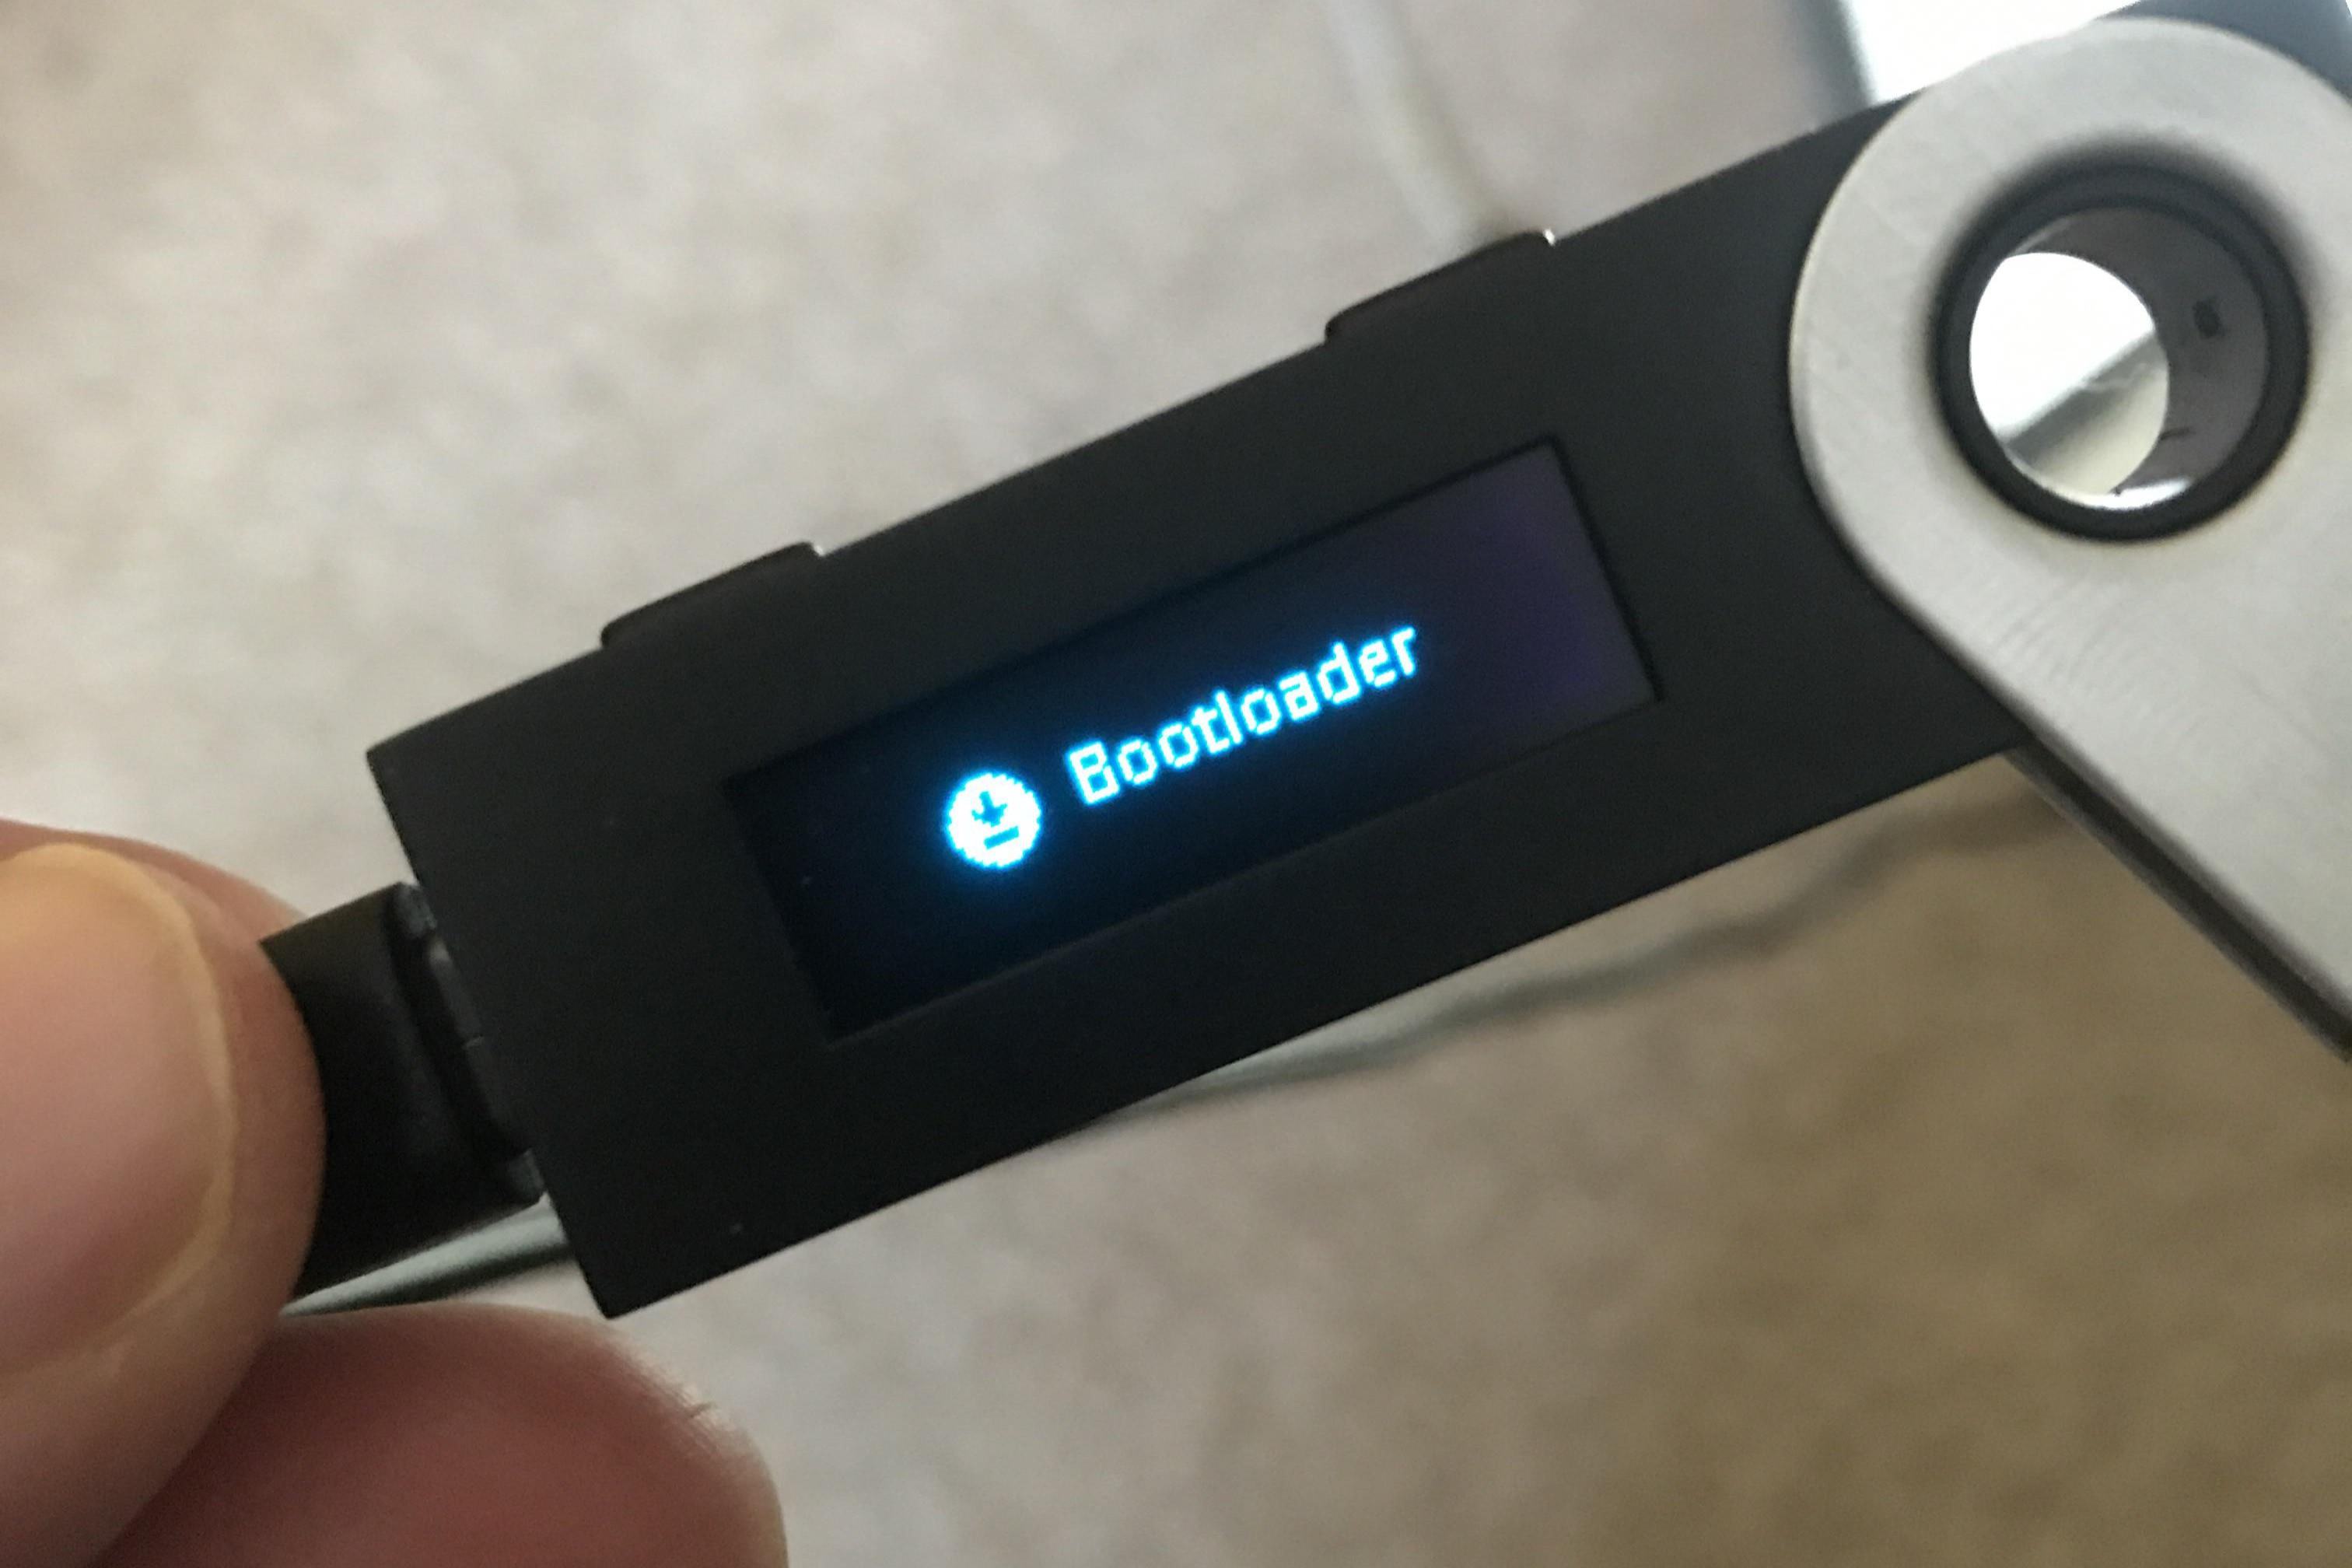 Ledger nano: Firmware too old for Segwit support